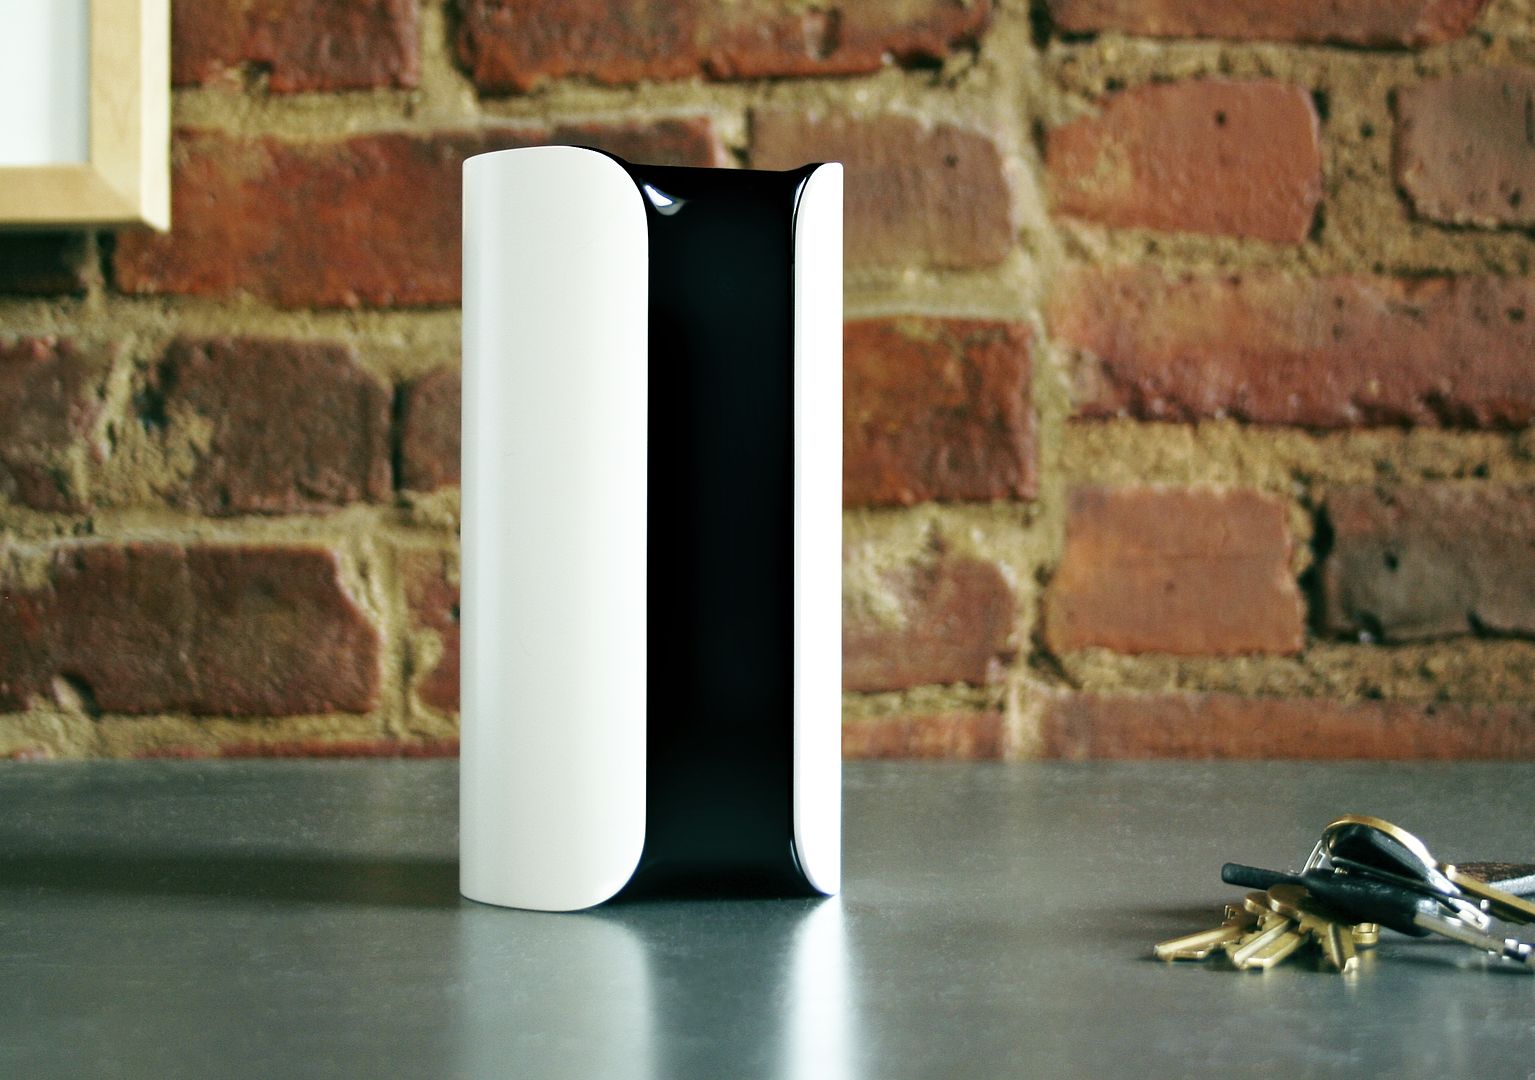 Canary Home Security Device | Cool Mom Tech